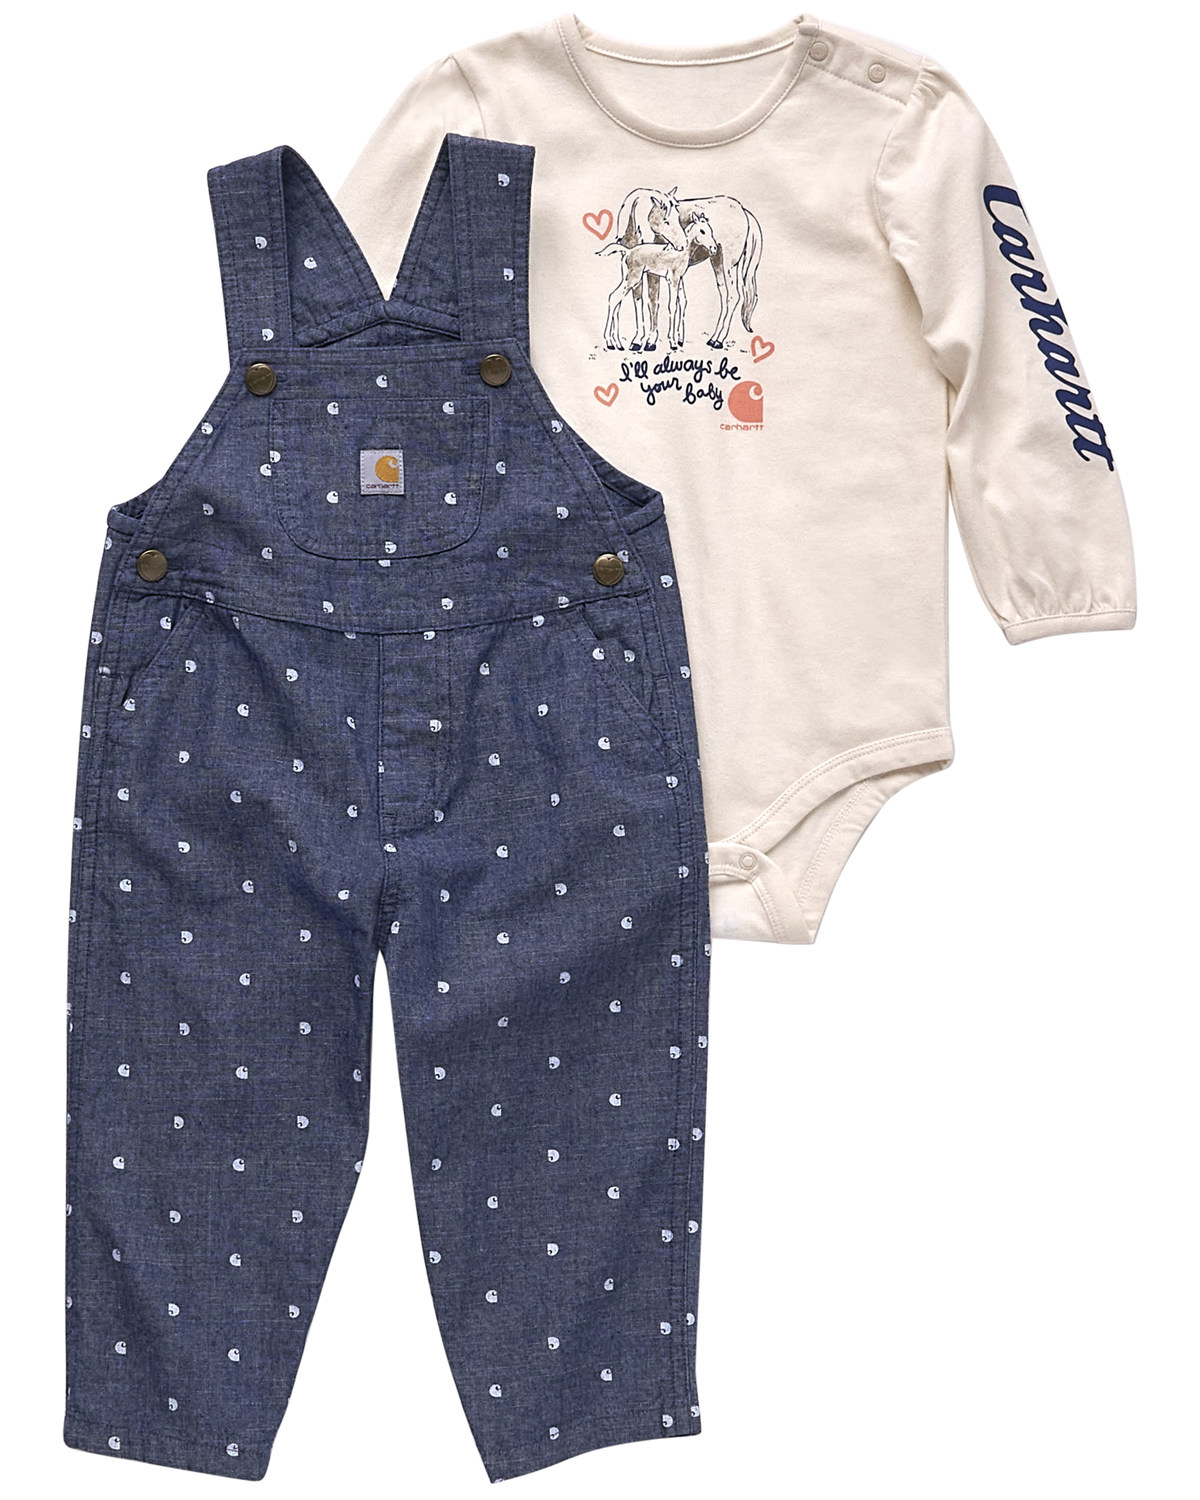 Carhartt Infant Girls' Horse Onesie and Overall Set